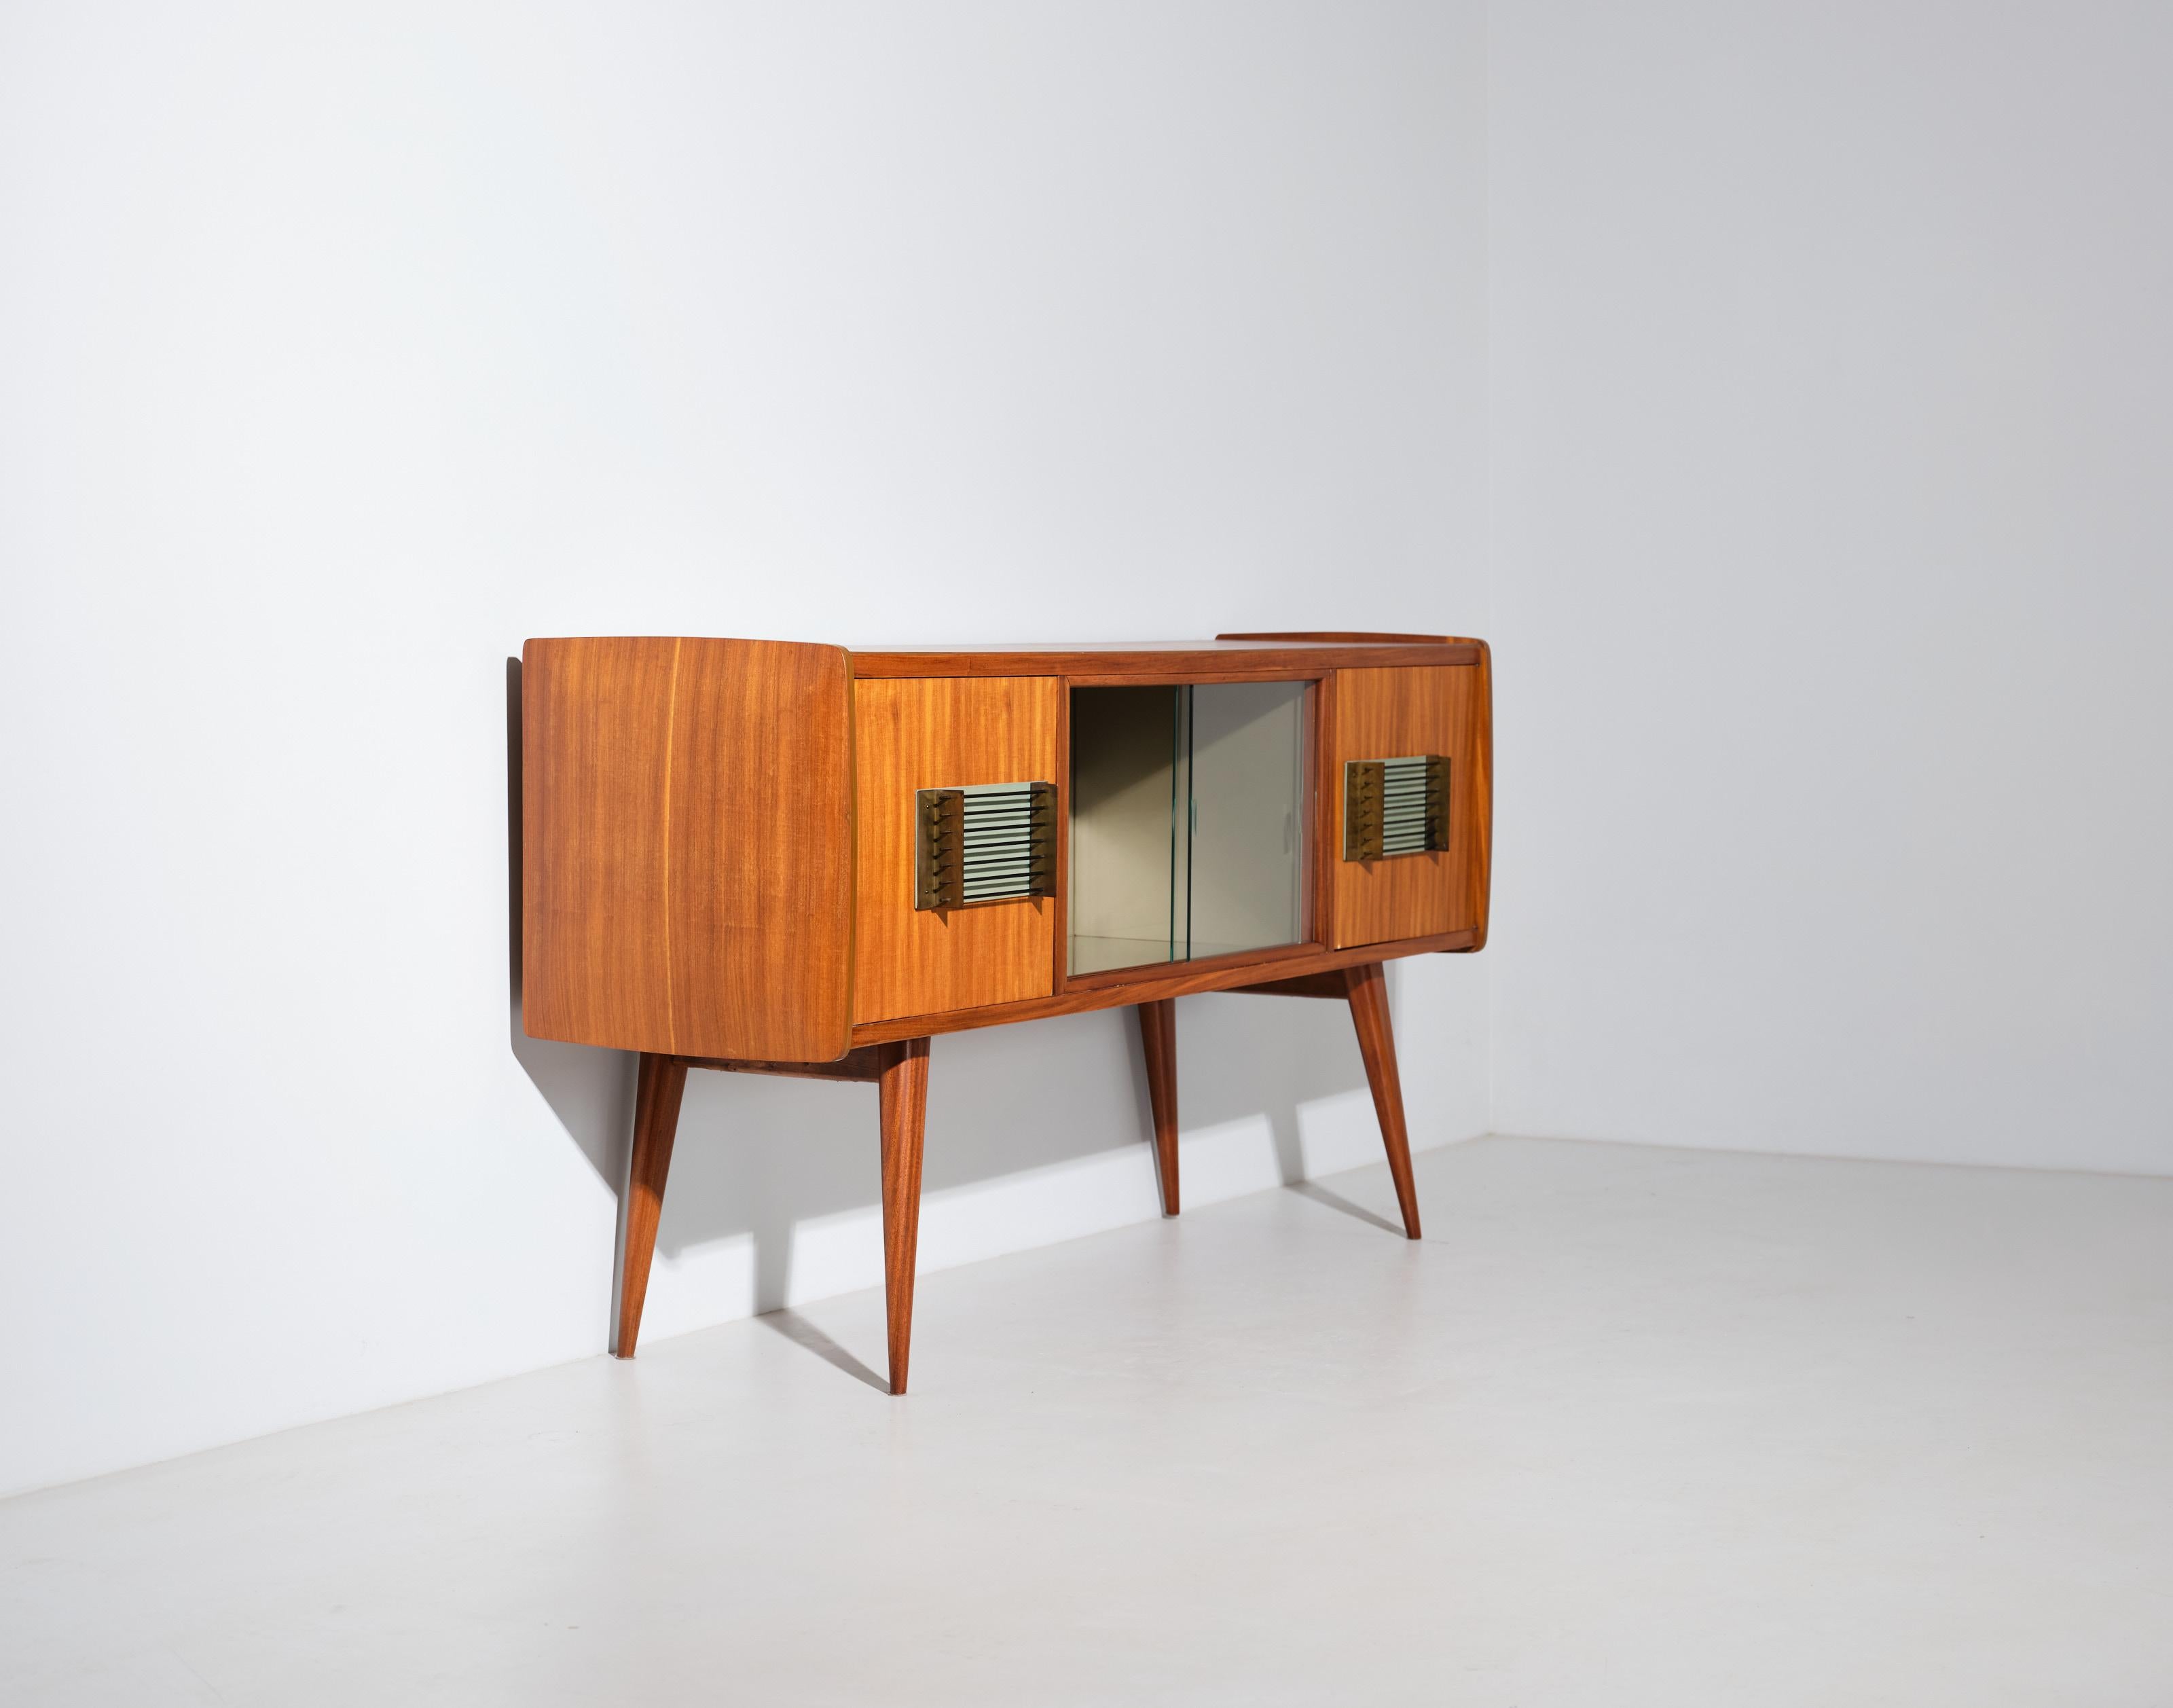 Introducing a stunning 1950s Italian Teak Credenza with a convenient bar module, combining refined design and exceptional craftsmanship. This exquisite piece, available for online purchase, embodies timeless elegance and Italian mastery.

Crafted